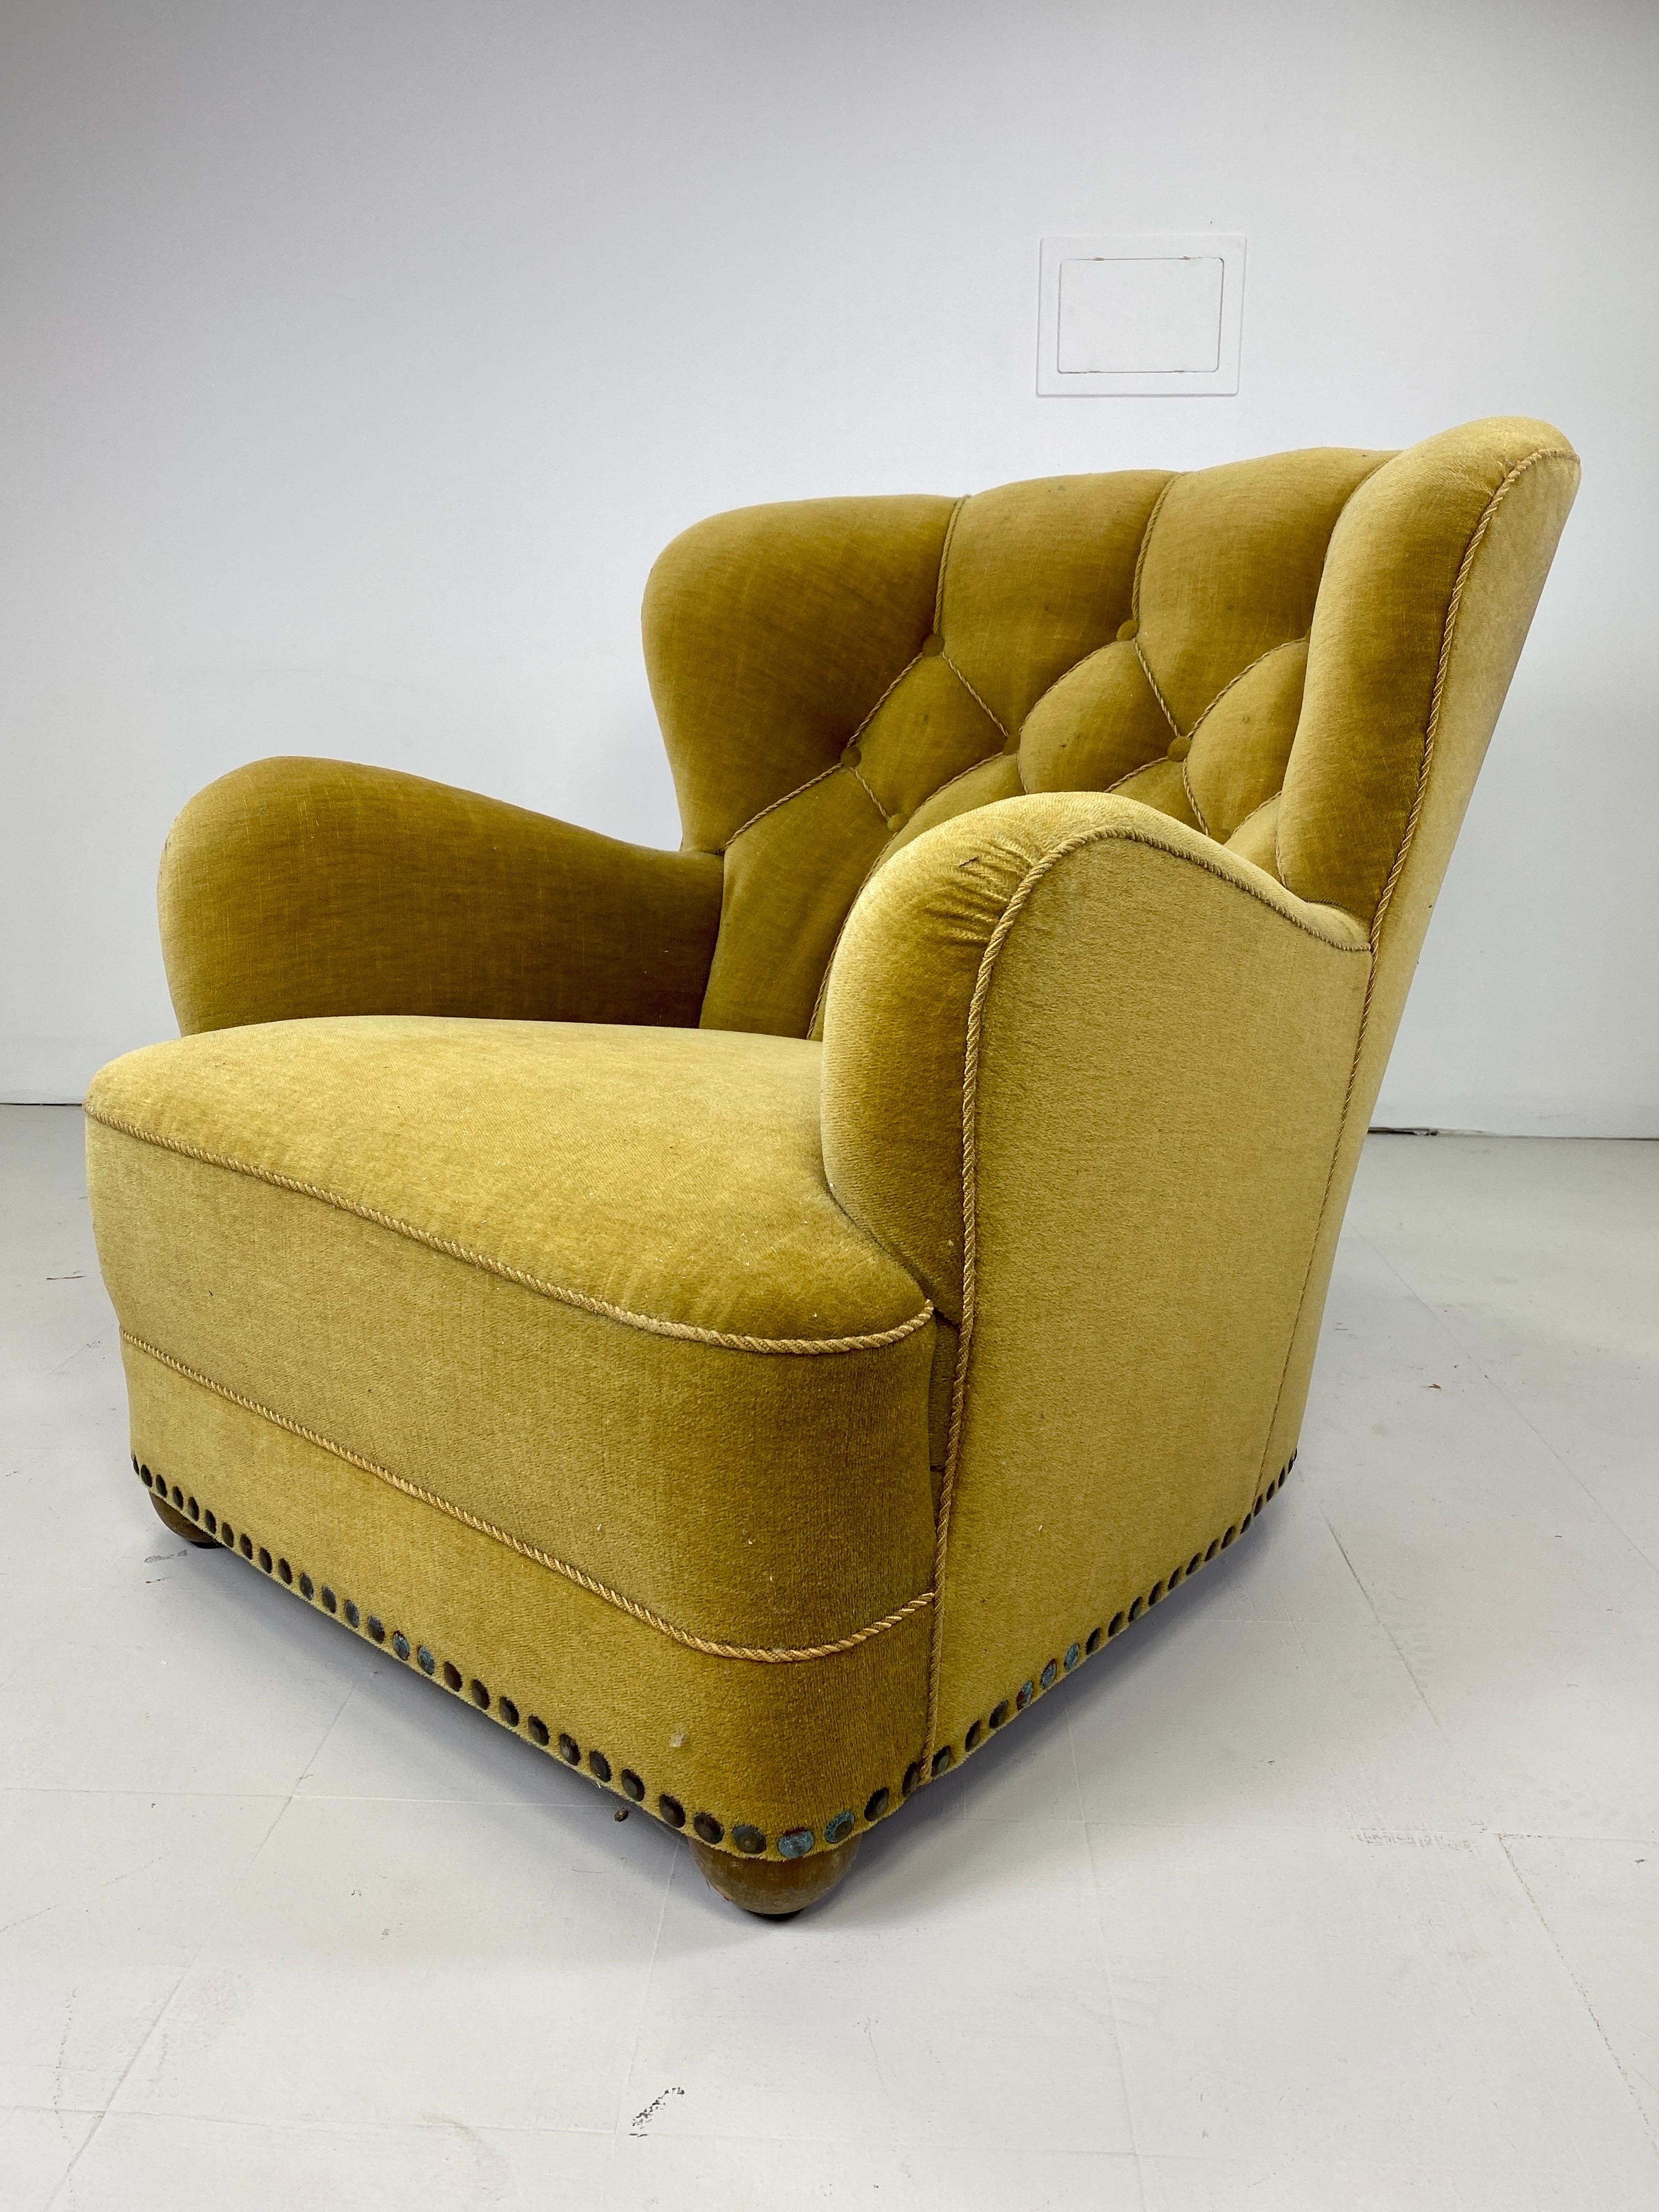 1940s Danish Lounge Chair In Good Condition For Sale In Turners Falls, MA